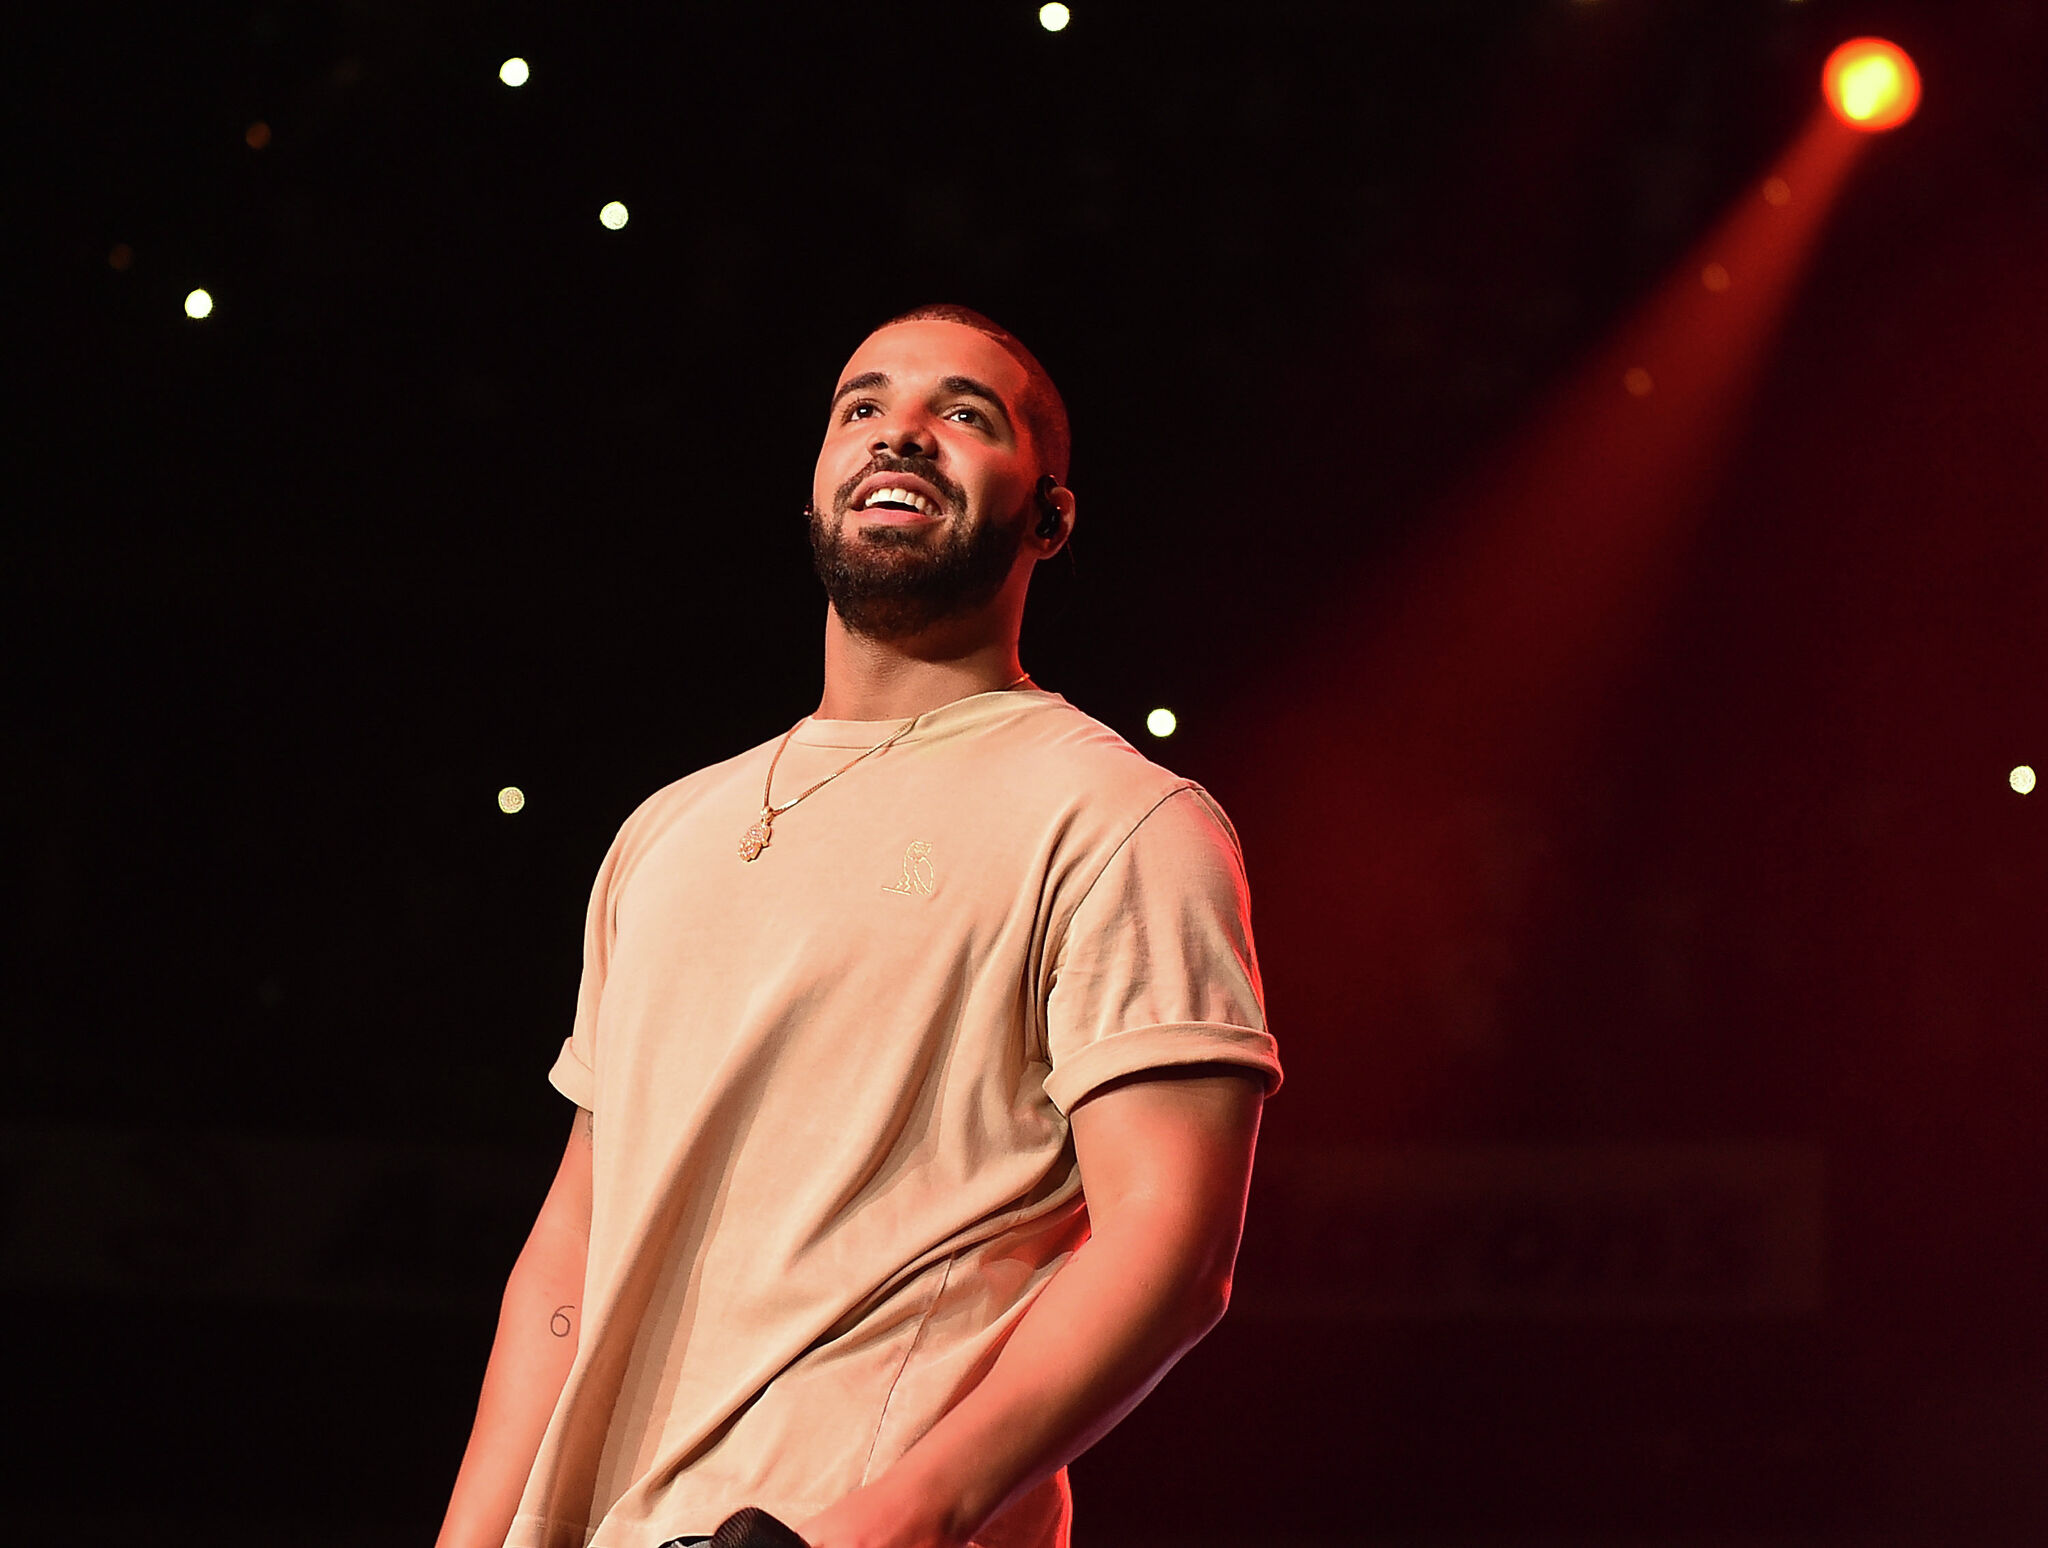 Drake's love affair with Houston began at a Warehouse Live show